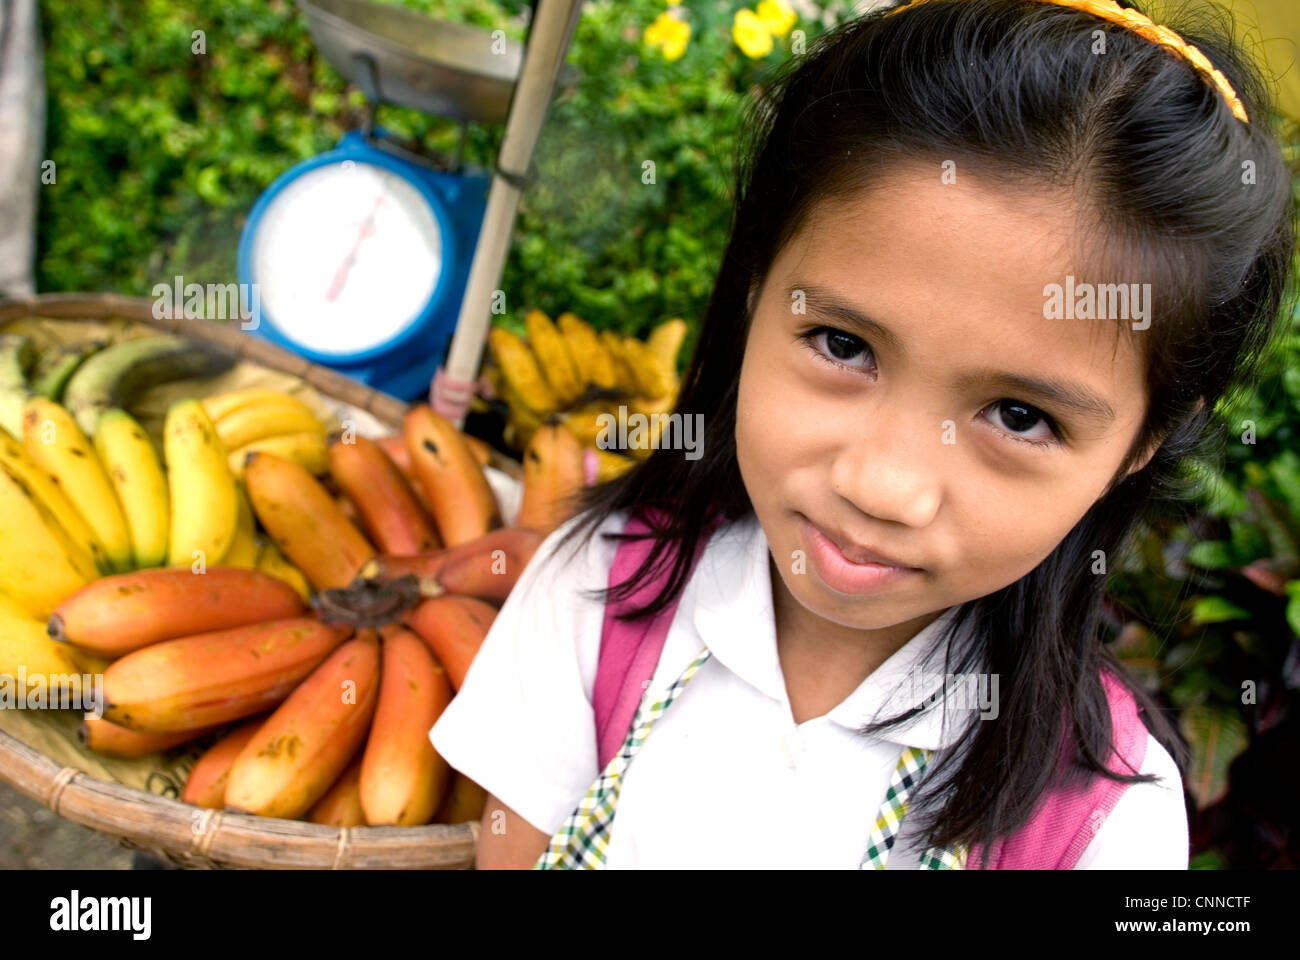 philippines, siquijor island, larena town, girl with fruit stall Stock Photo